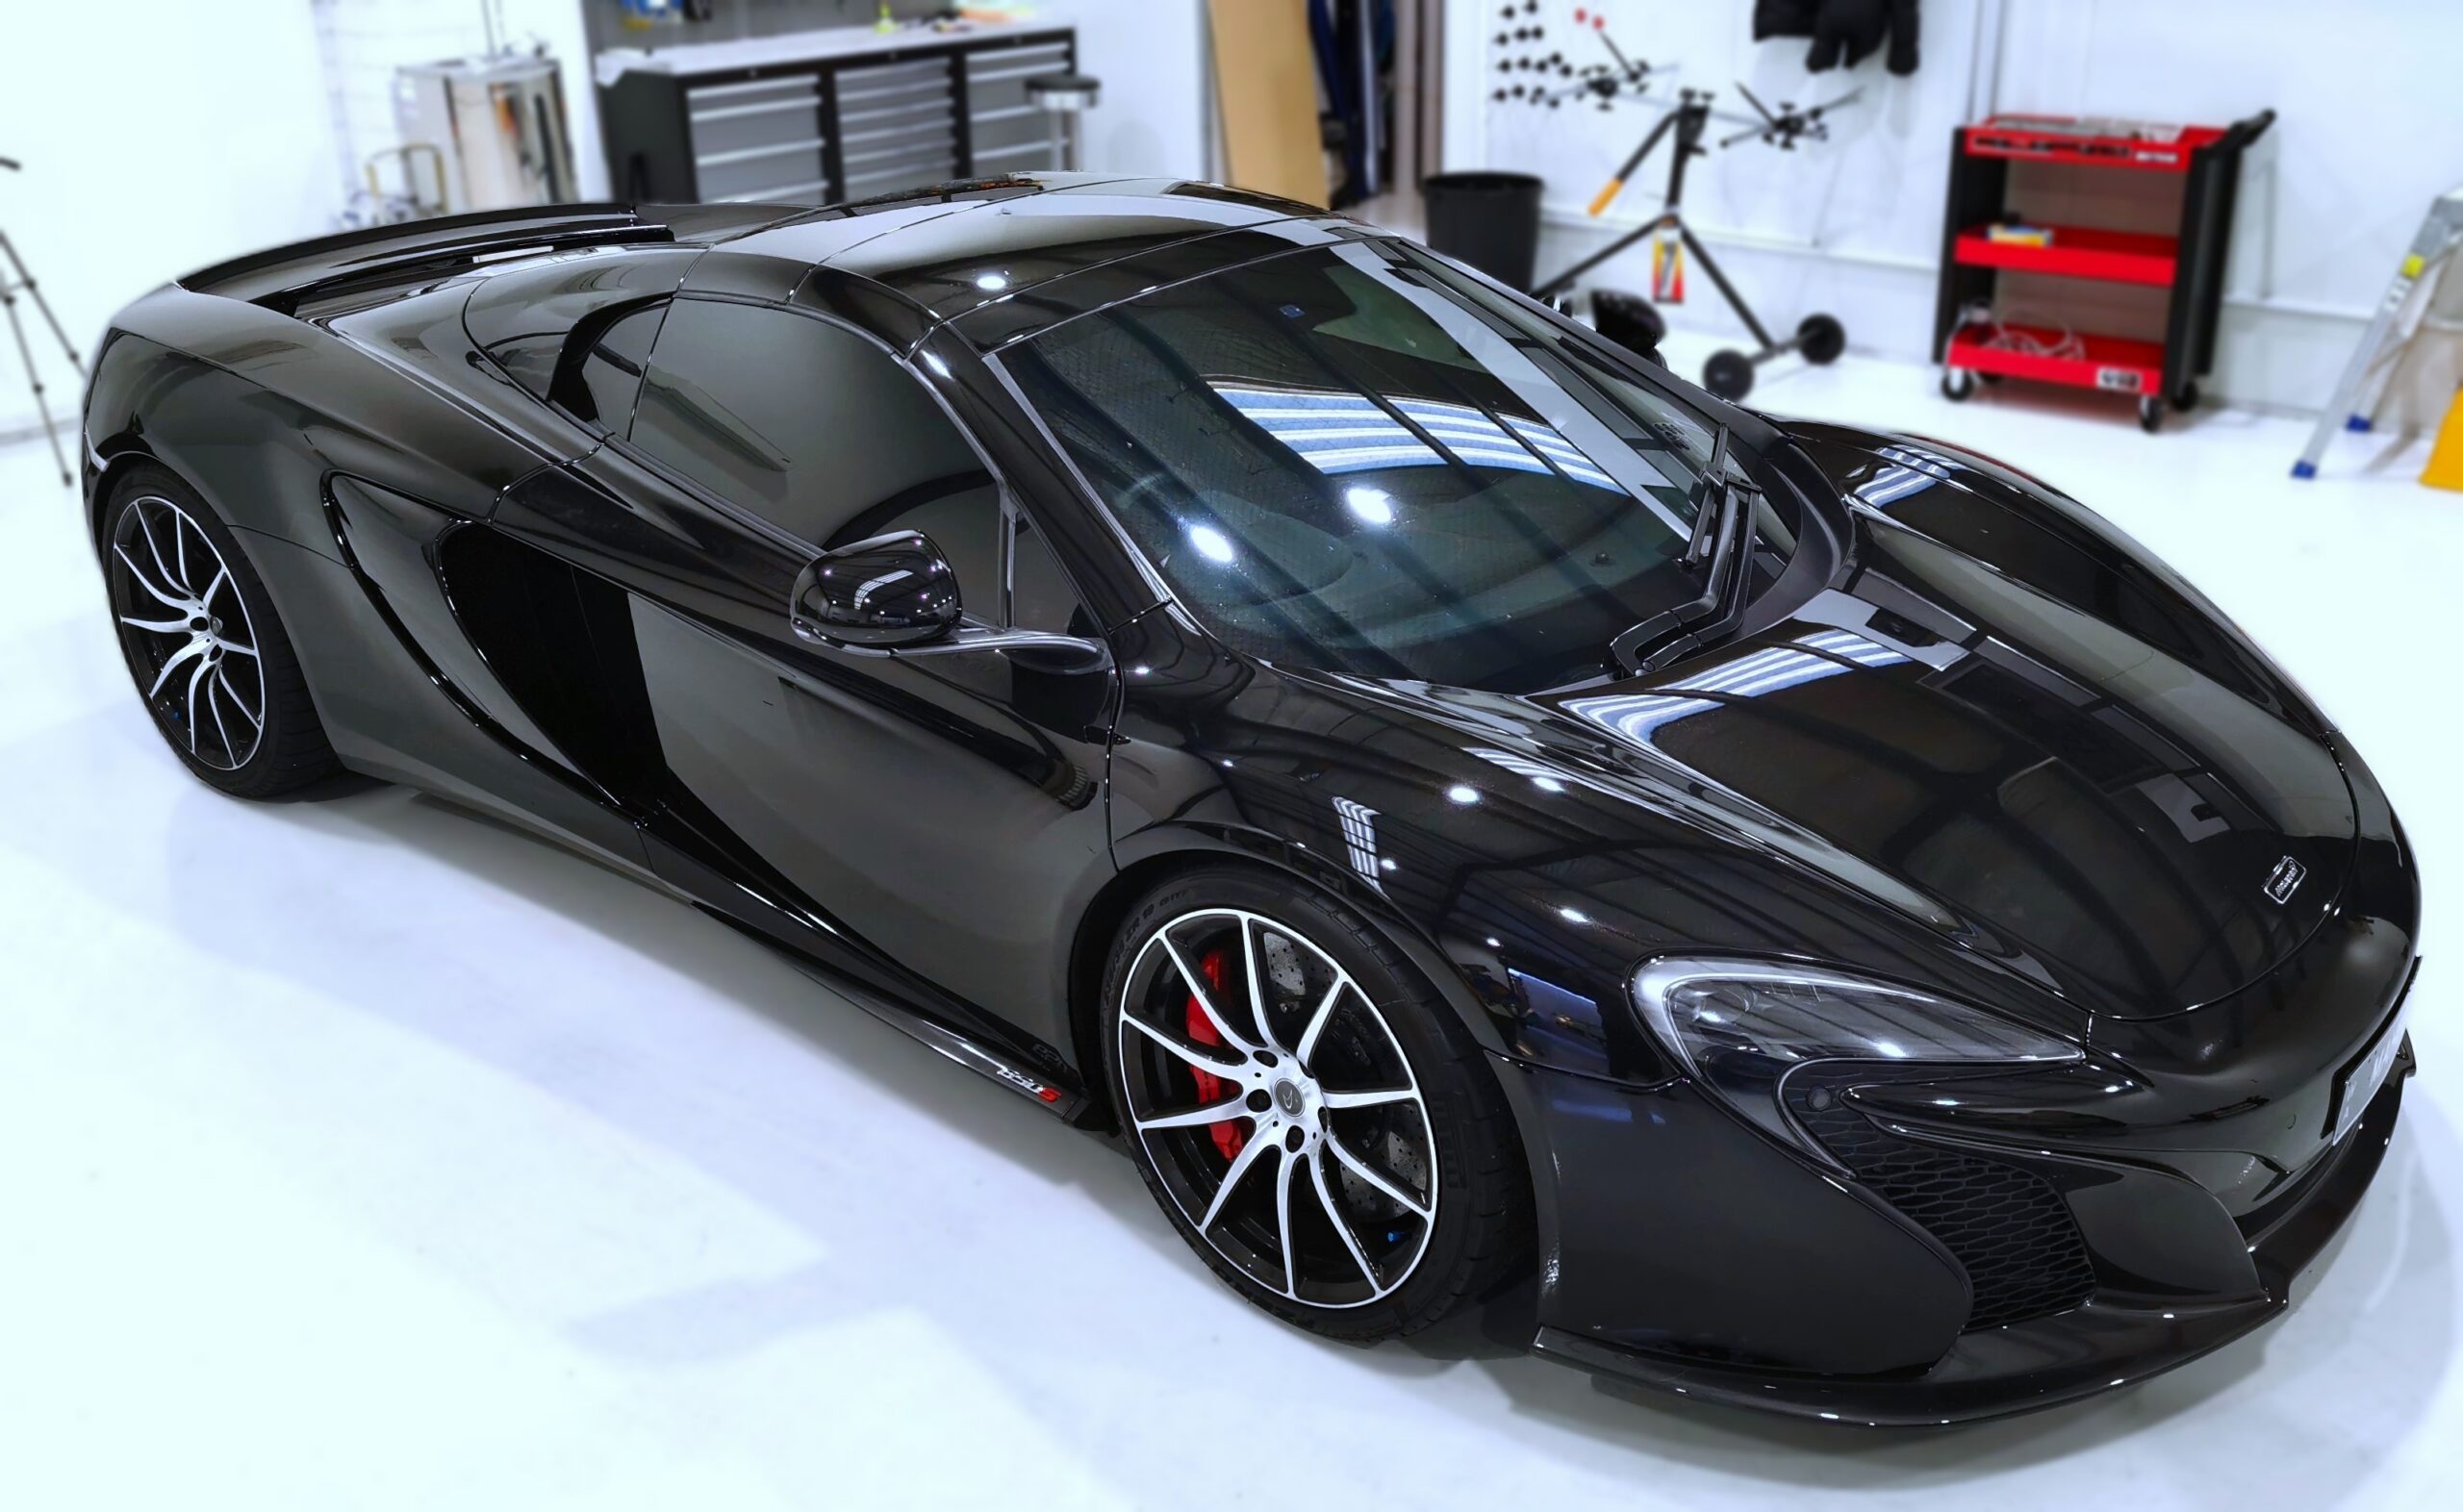 Clear Paint Protection Film McLaren 650s Spider 05 1 scaled